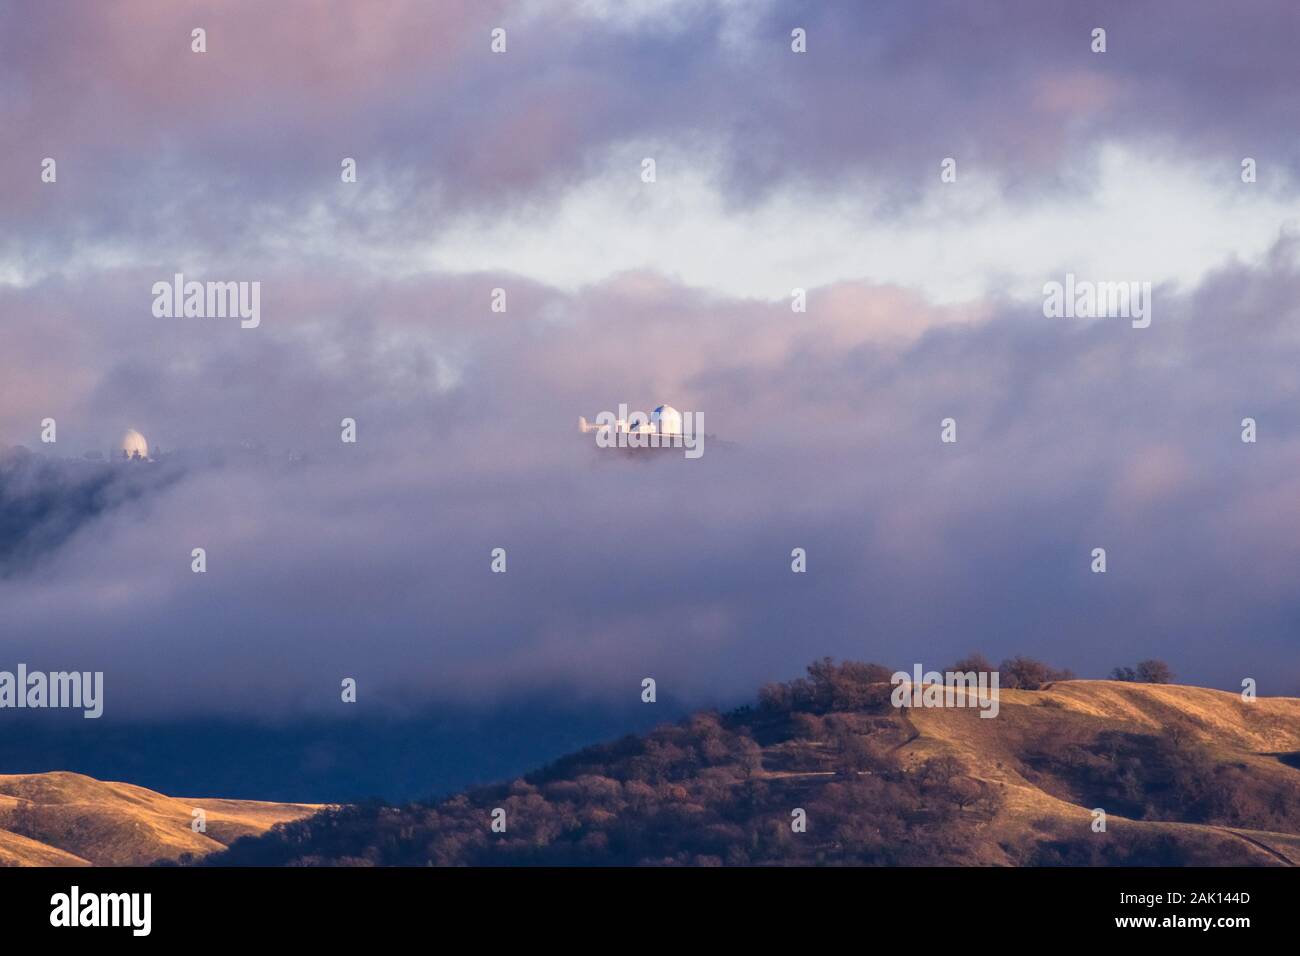 Storm clouds covering the top of Mount Hamilton, with Lick Observatory peeking through them; San Jose, South San Francisco Bay Area, California Stock Photo